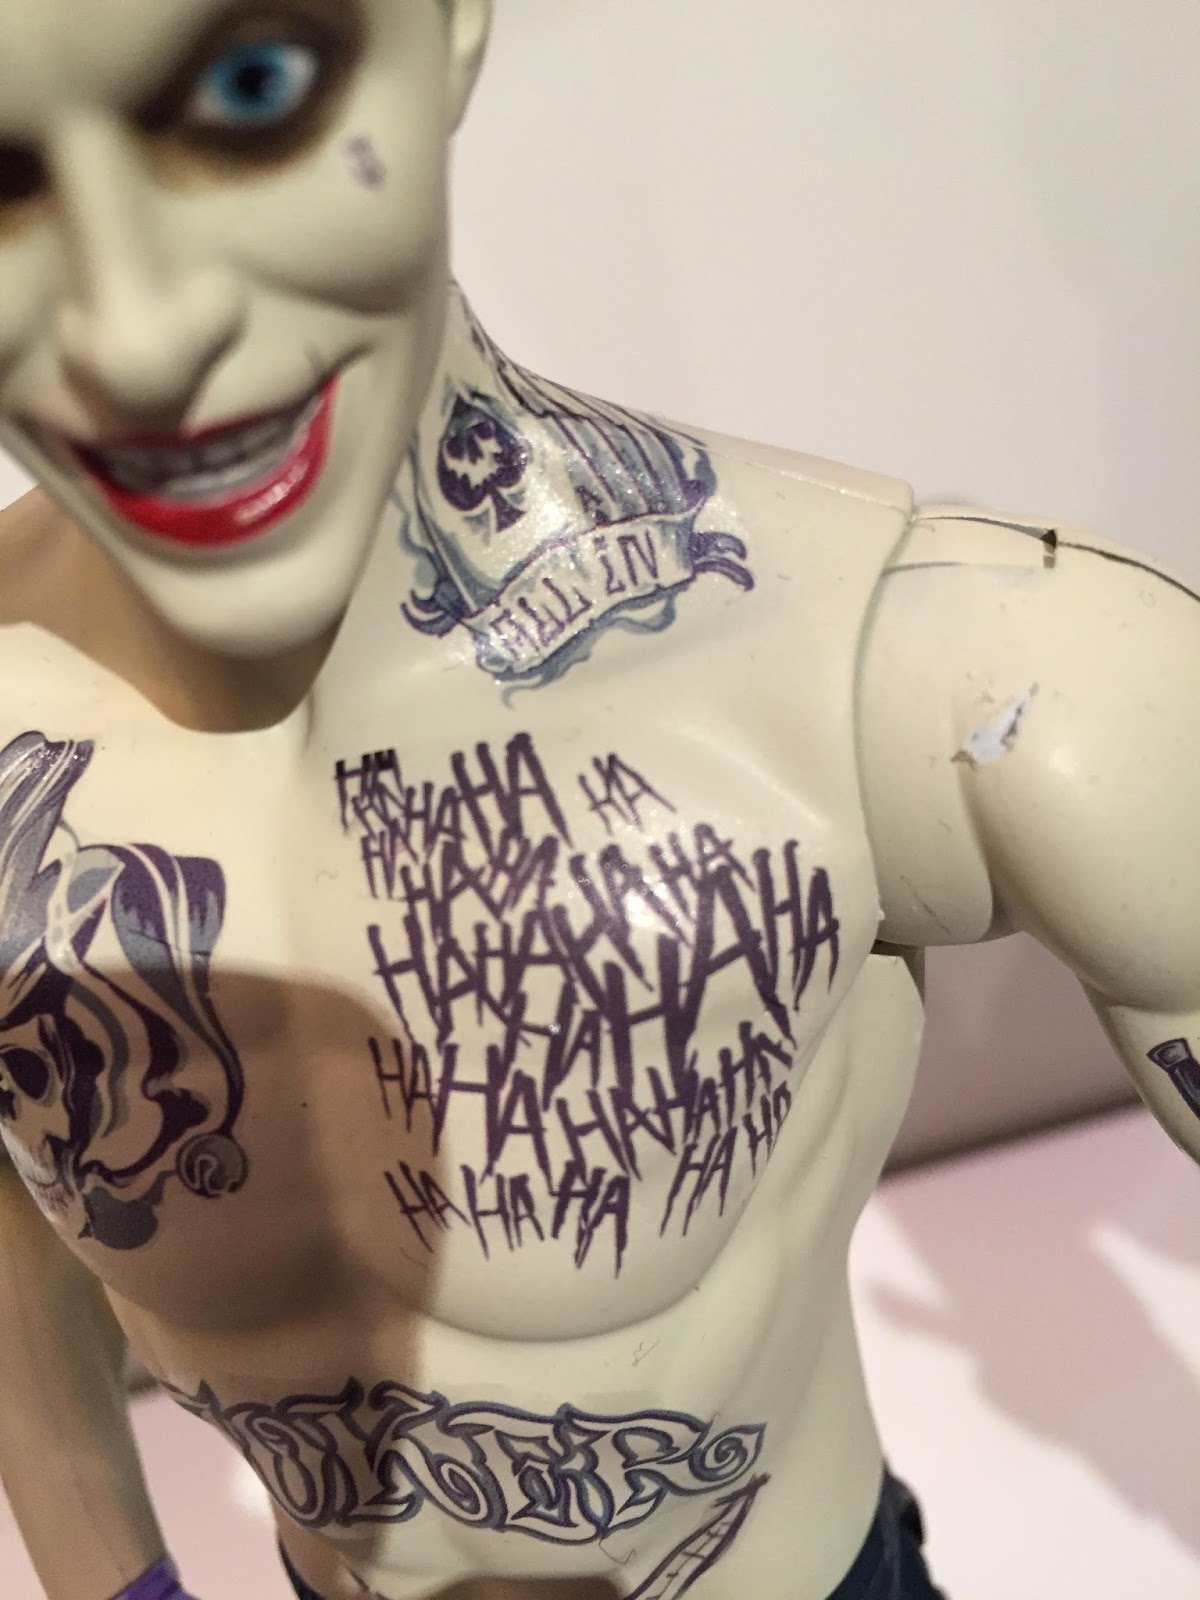 Get Your Joker Smile Hand Tattoo Real vs Fake Edition  Tattoo Glee